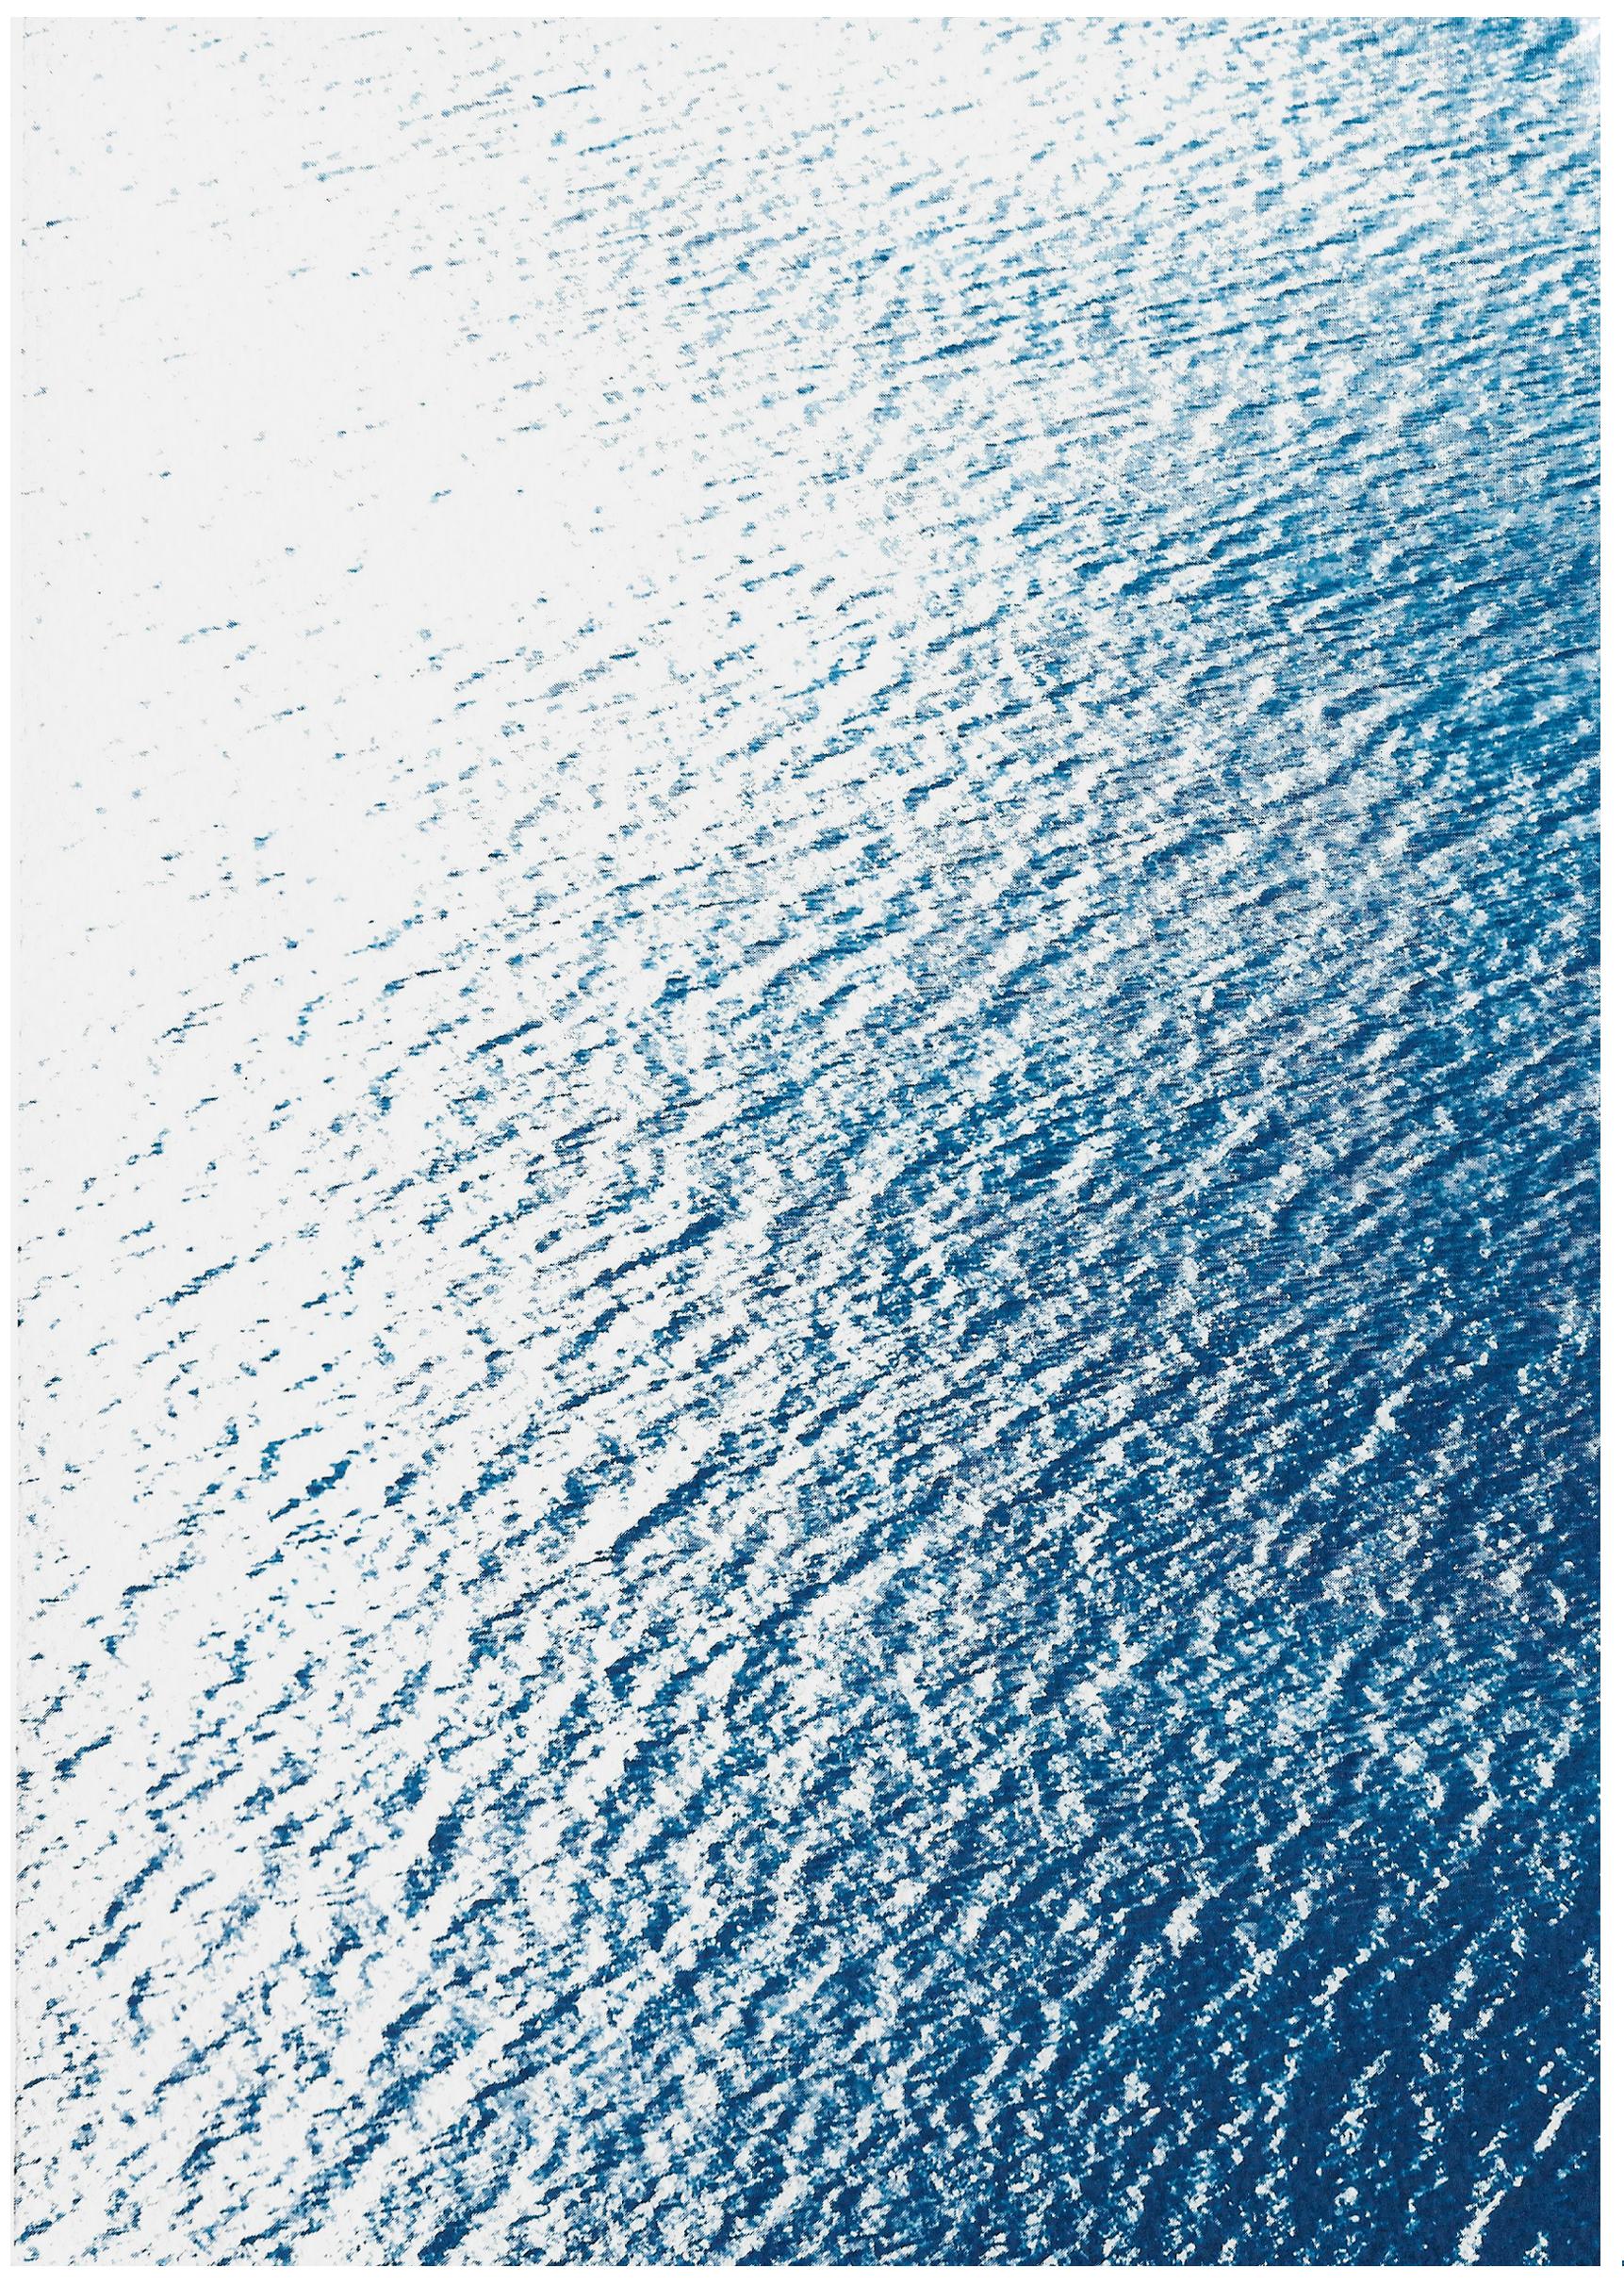 Nautical Diptych of Smooth Bay in the Mediterranean, Zen Waters Cyanotype, Paper - Blue Landscape Painting by Kind of Cyan